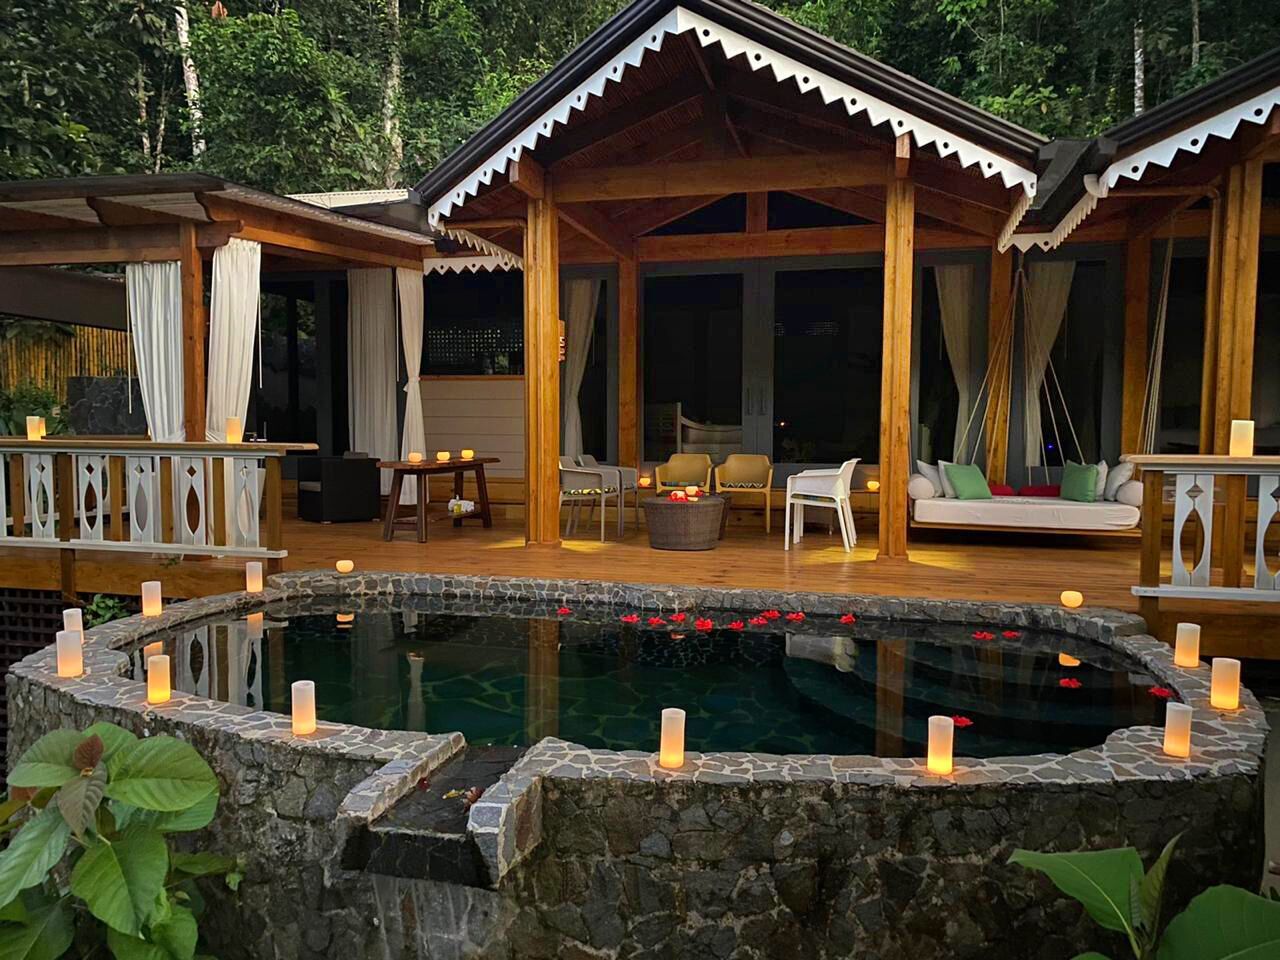 The best Costa Rica eco-resorts and lodges for the perfect retreat amidst protected nature and sustainability philosophy